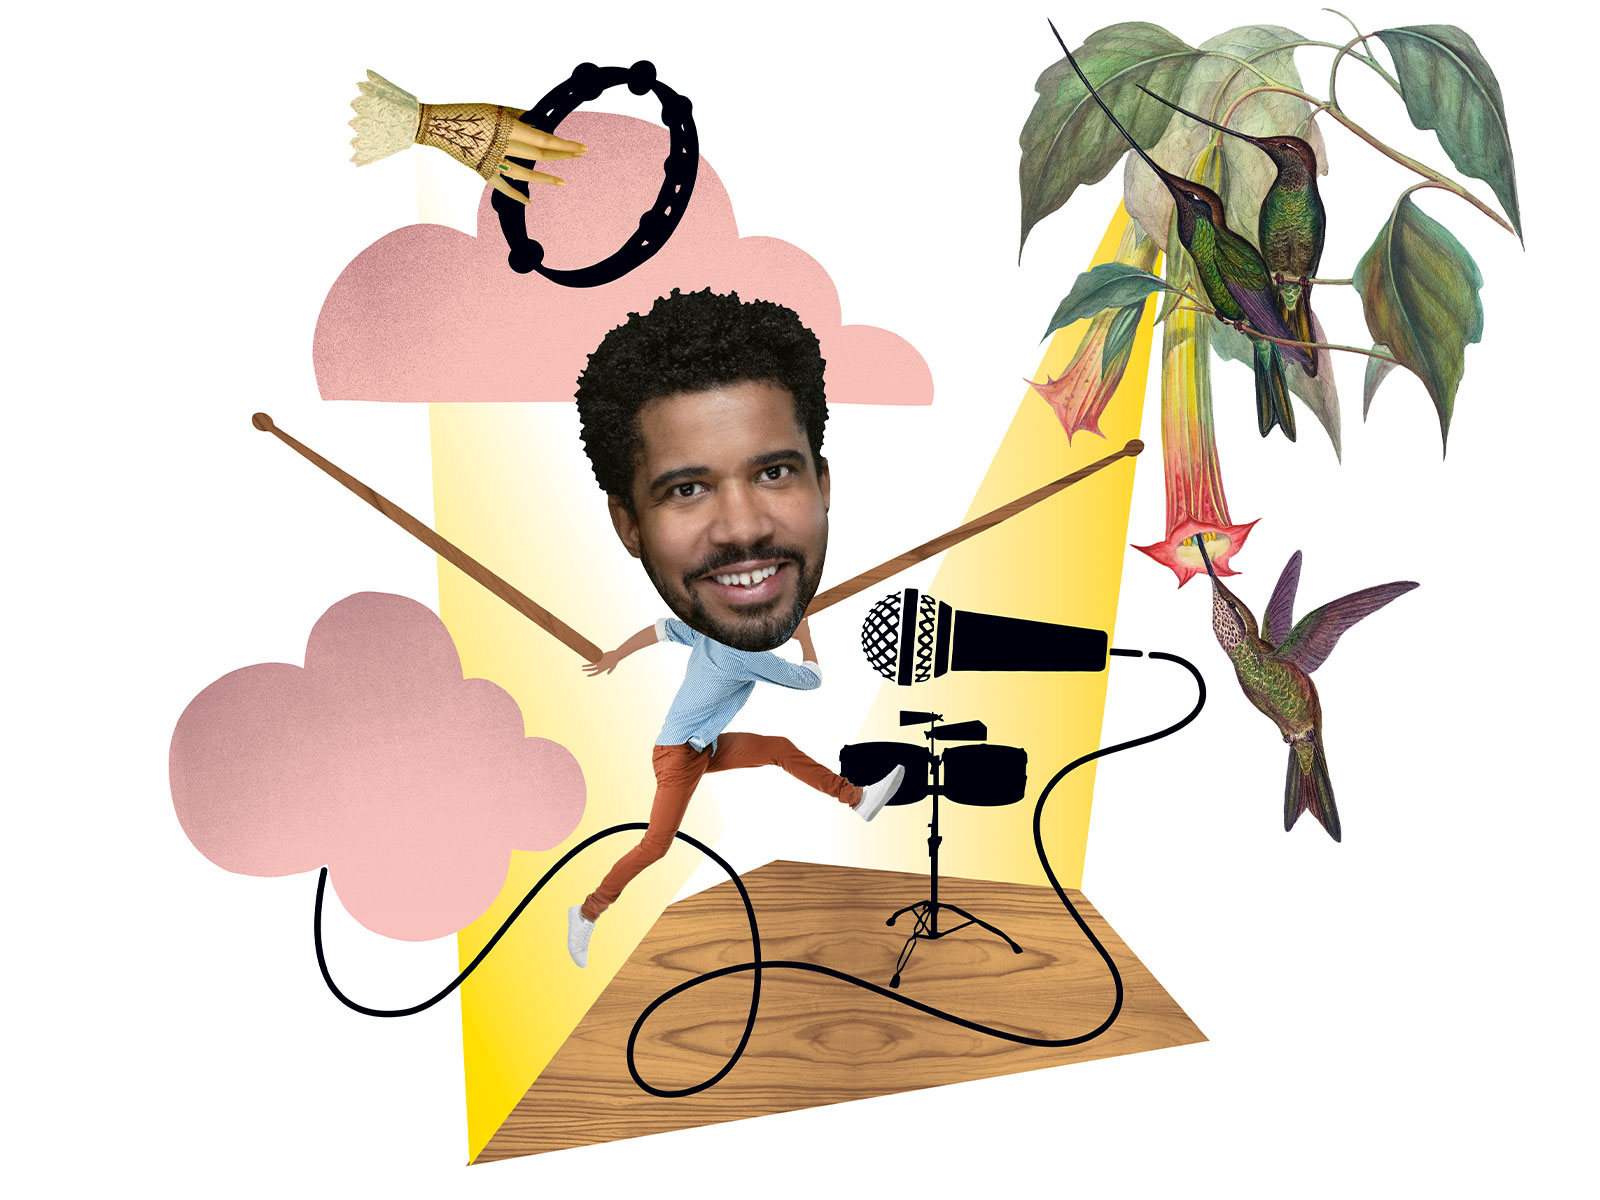 The presenter Yankho Kamwendo in a collage image with a microphone, a leaf a hummingbird and a tambourine.